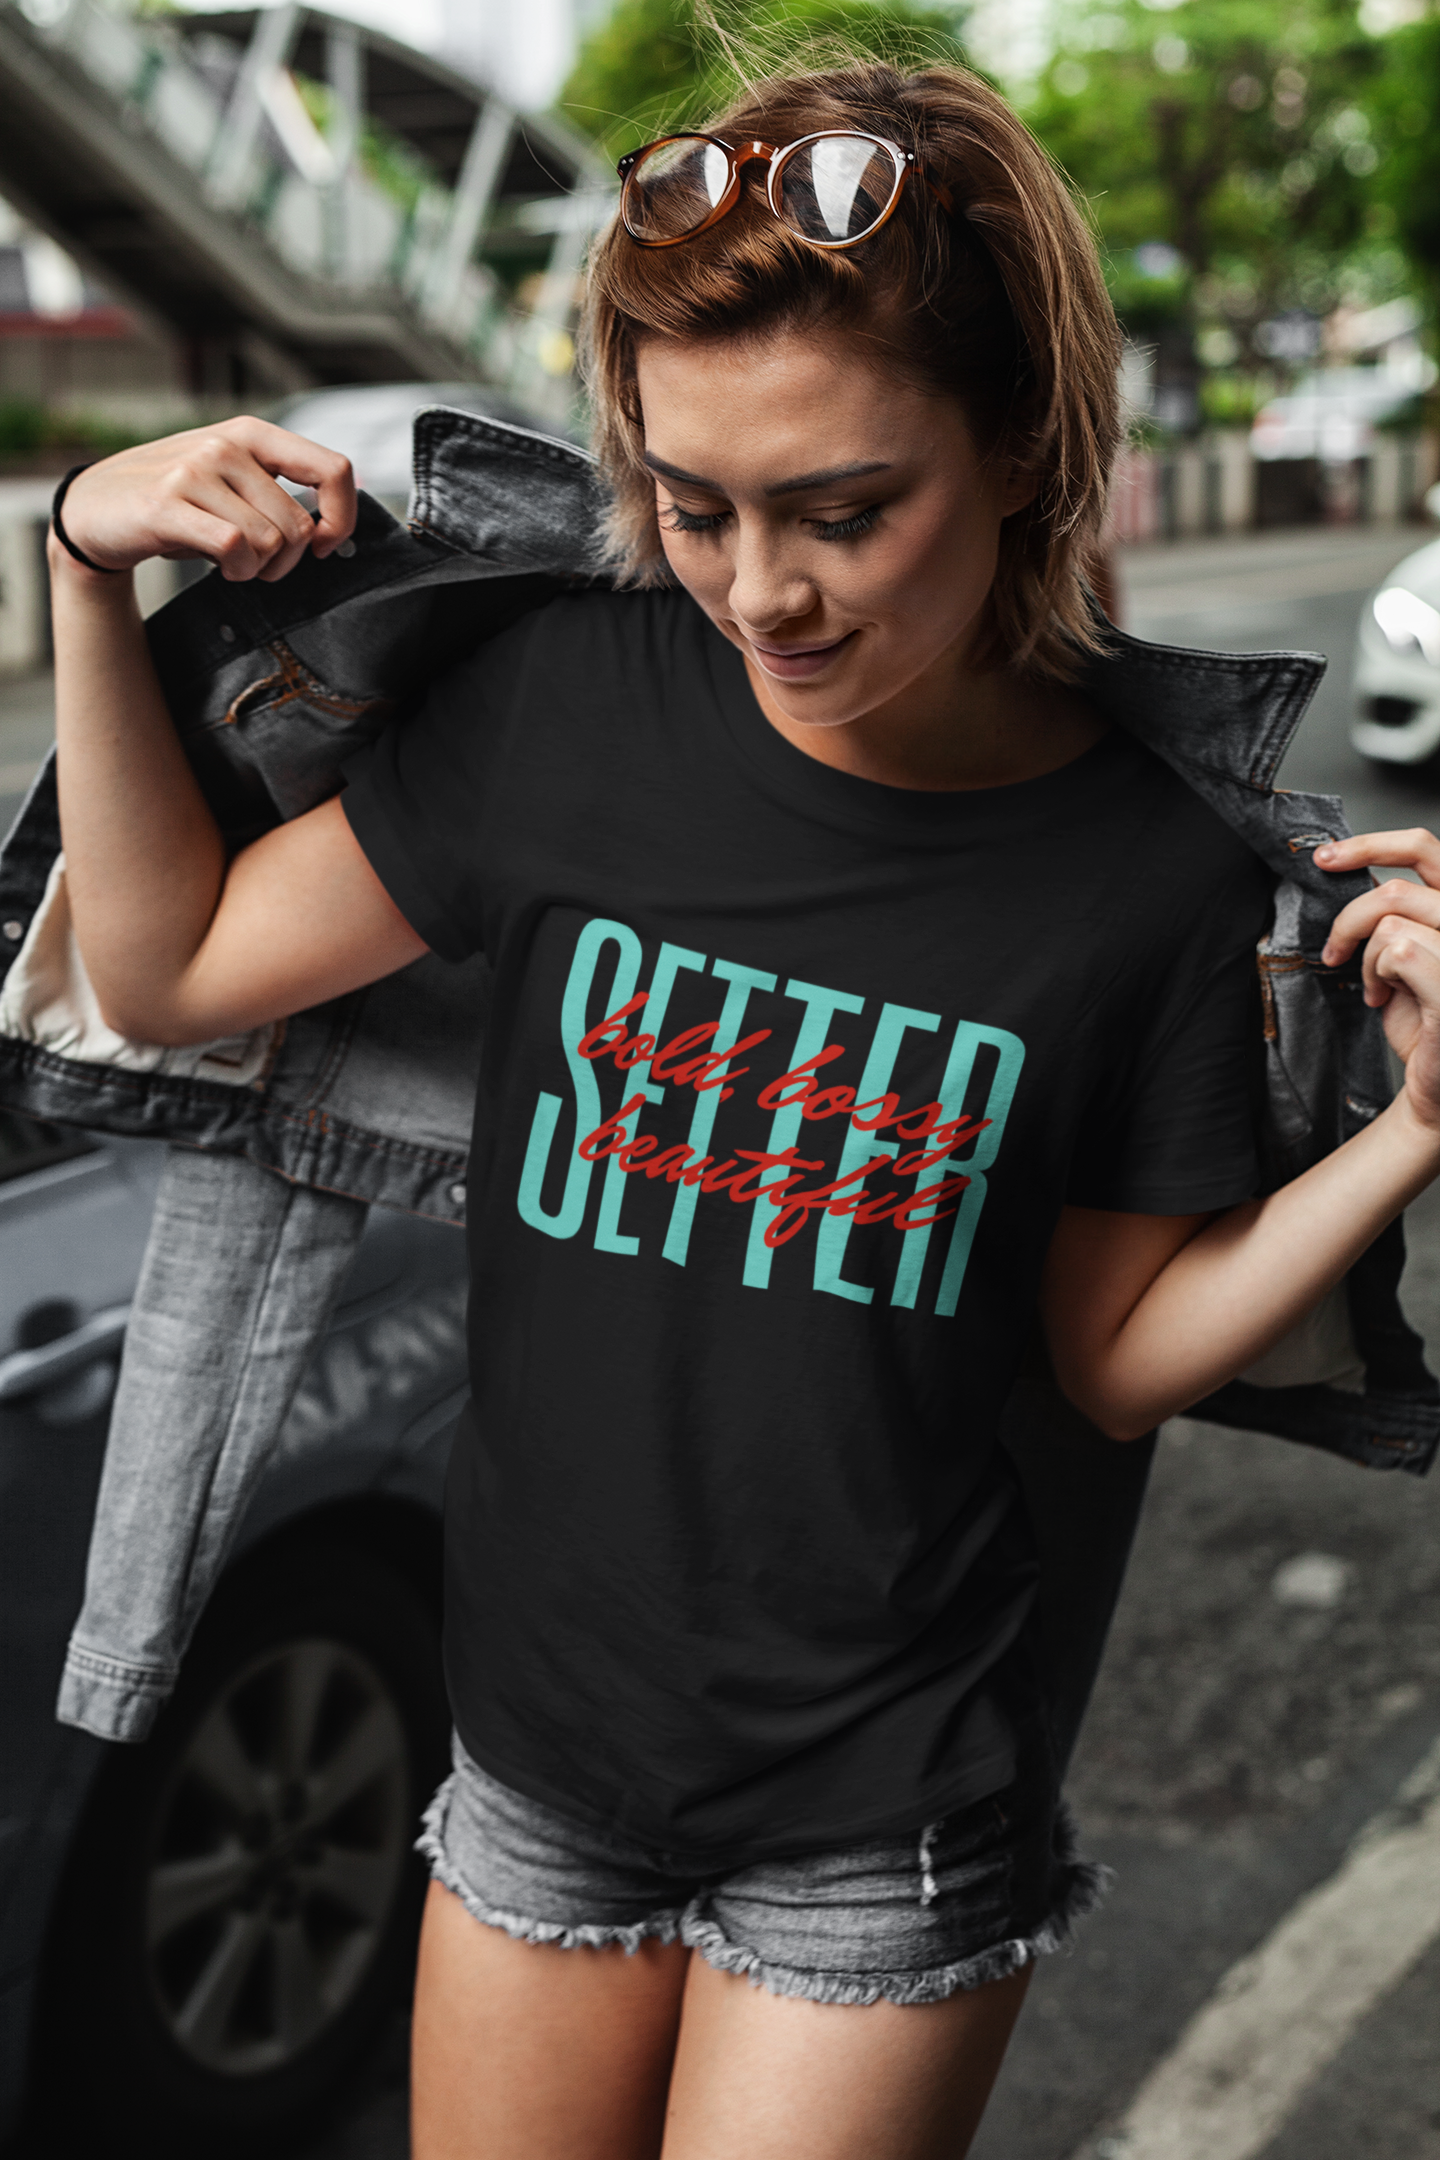 Another one of my Volleybragswag design lines focuses on being creative with funny volleyball setter shirts celebrating the setter life like the ones below.